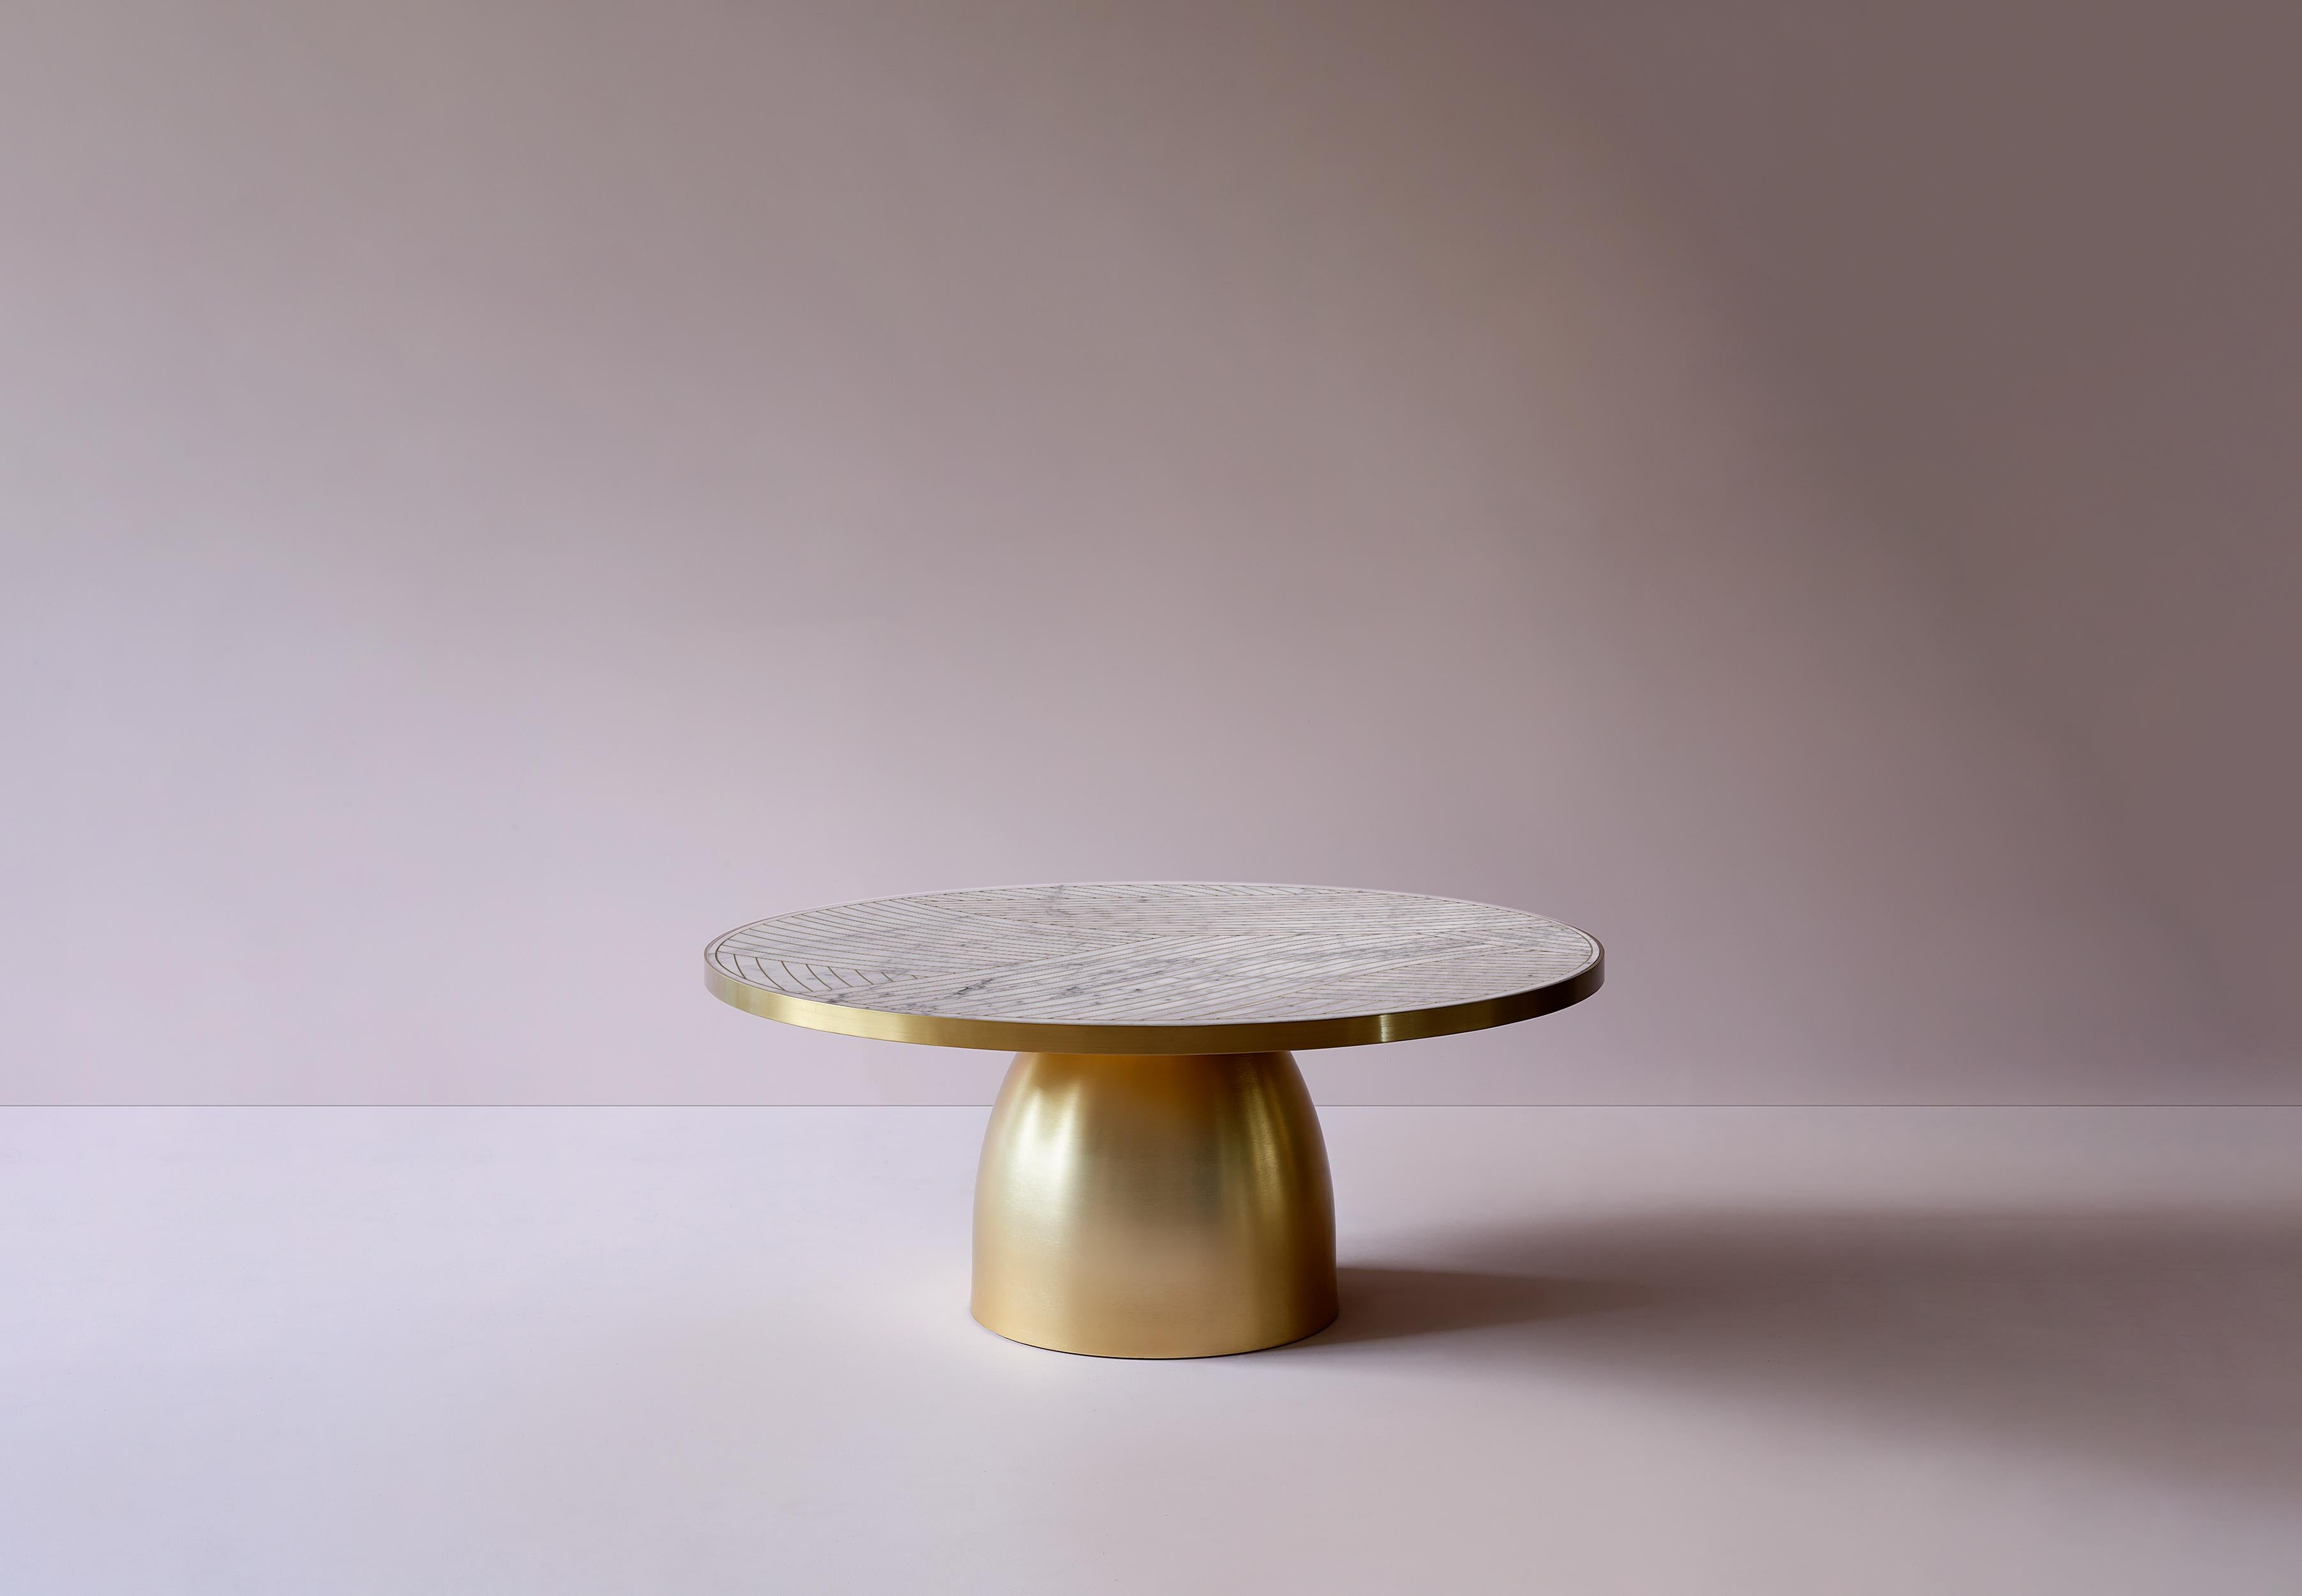 Inspiration
The distinctive pedestal leg is inspired by the arches and gilded domes typical of Middle Eastern architecture – Bethan wanted to capture the experience of exploring a new city and seeing the sunlight bounce off golden roofs.

Craft
The